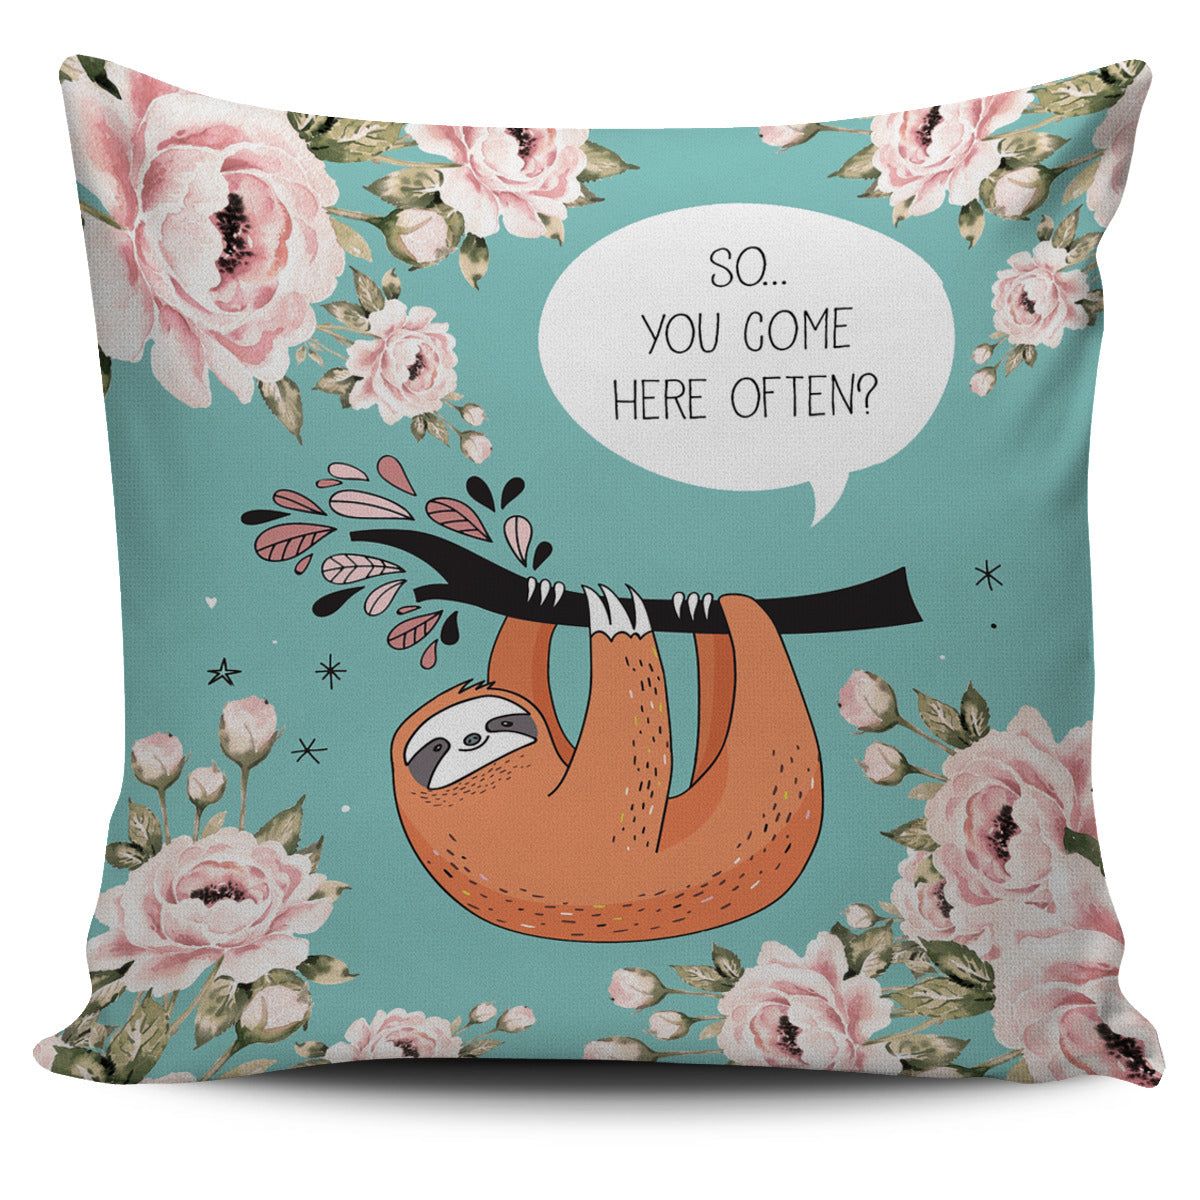 Sloth Talk Pillow Cover